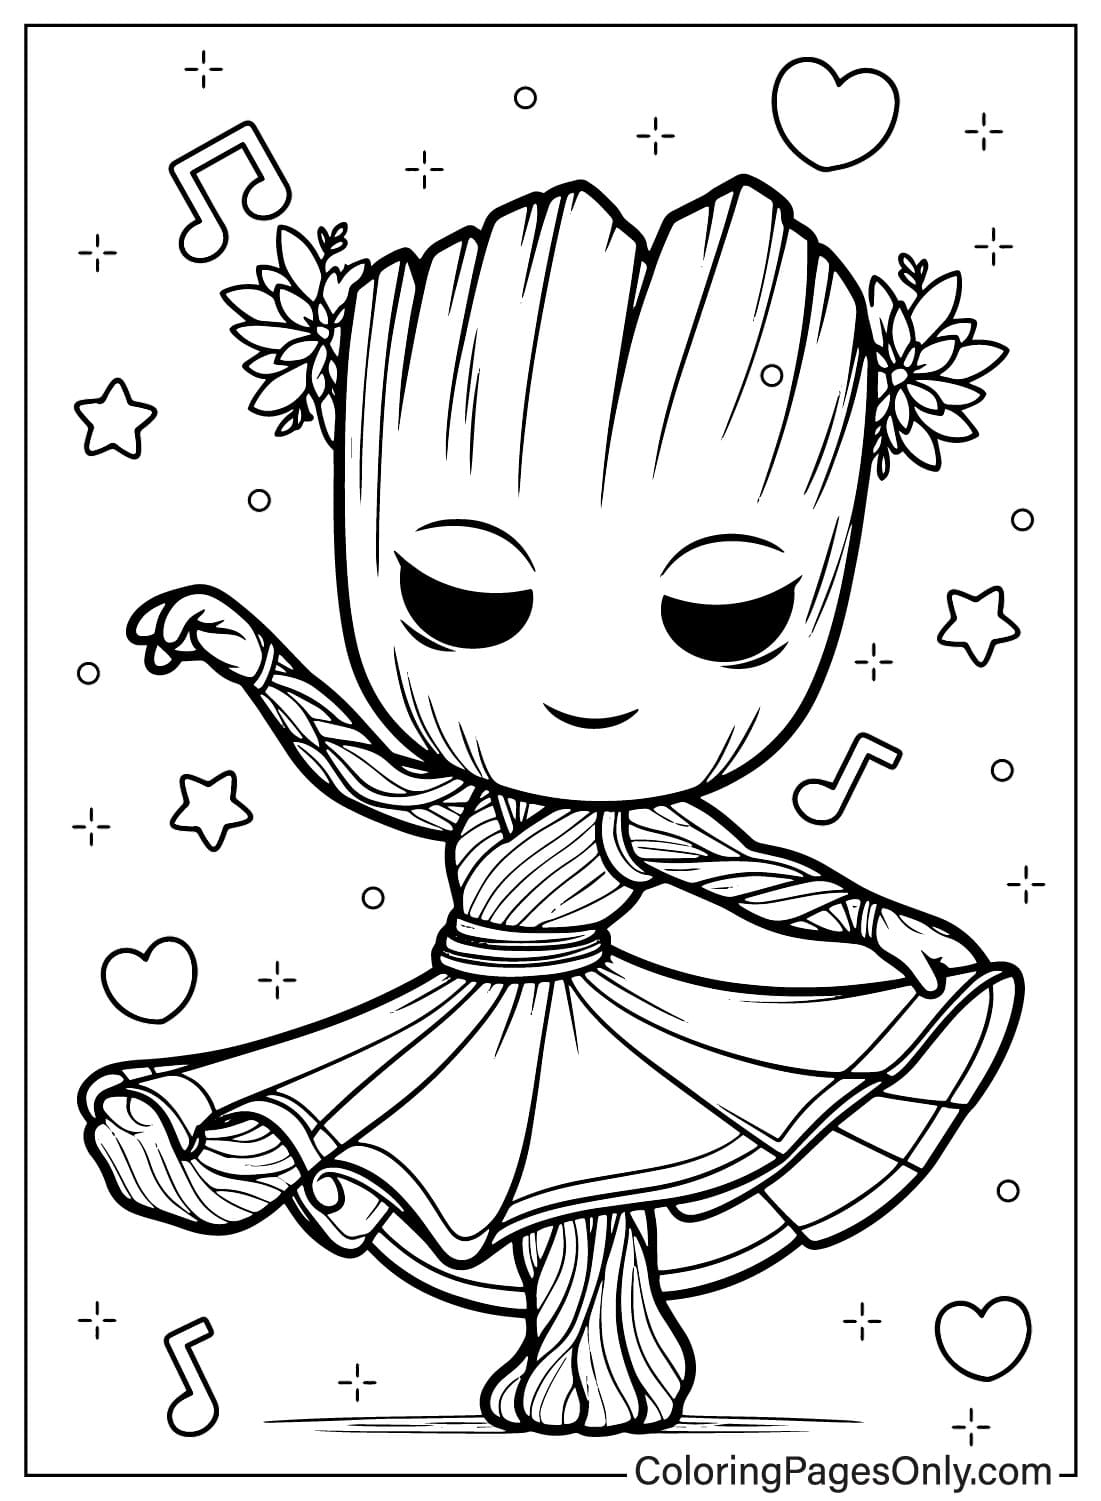 Cute Groot Coloring Page from Groot